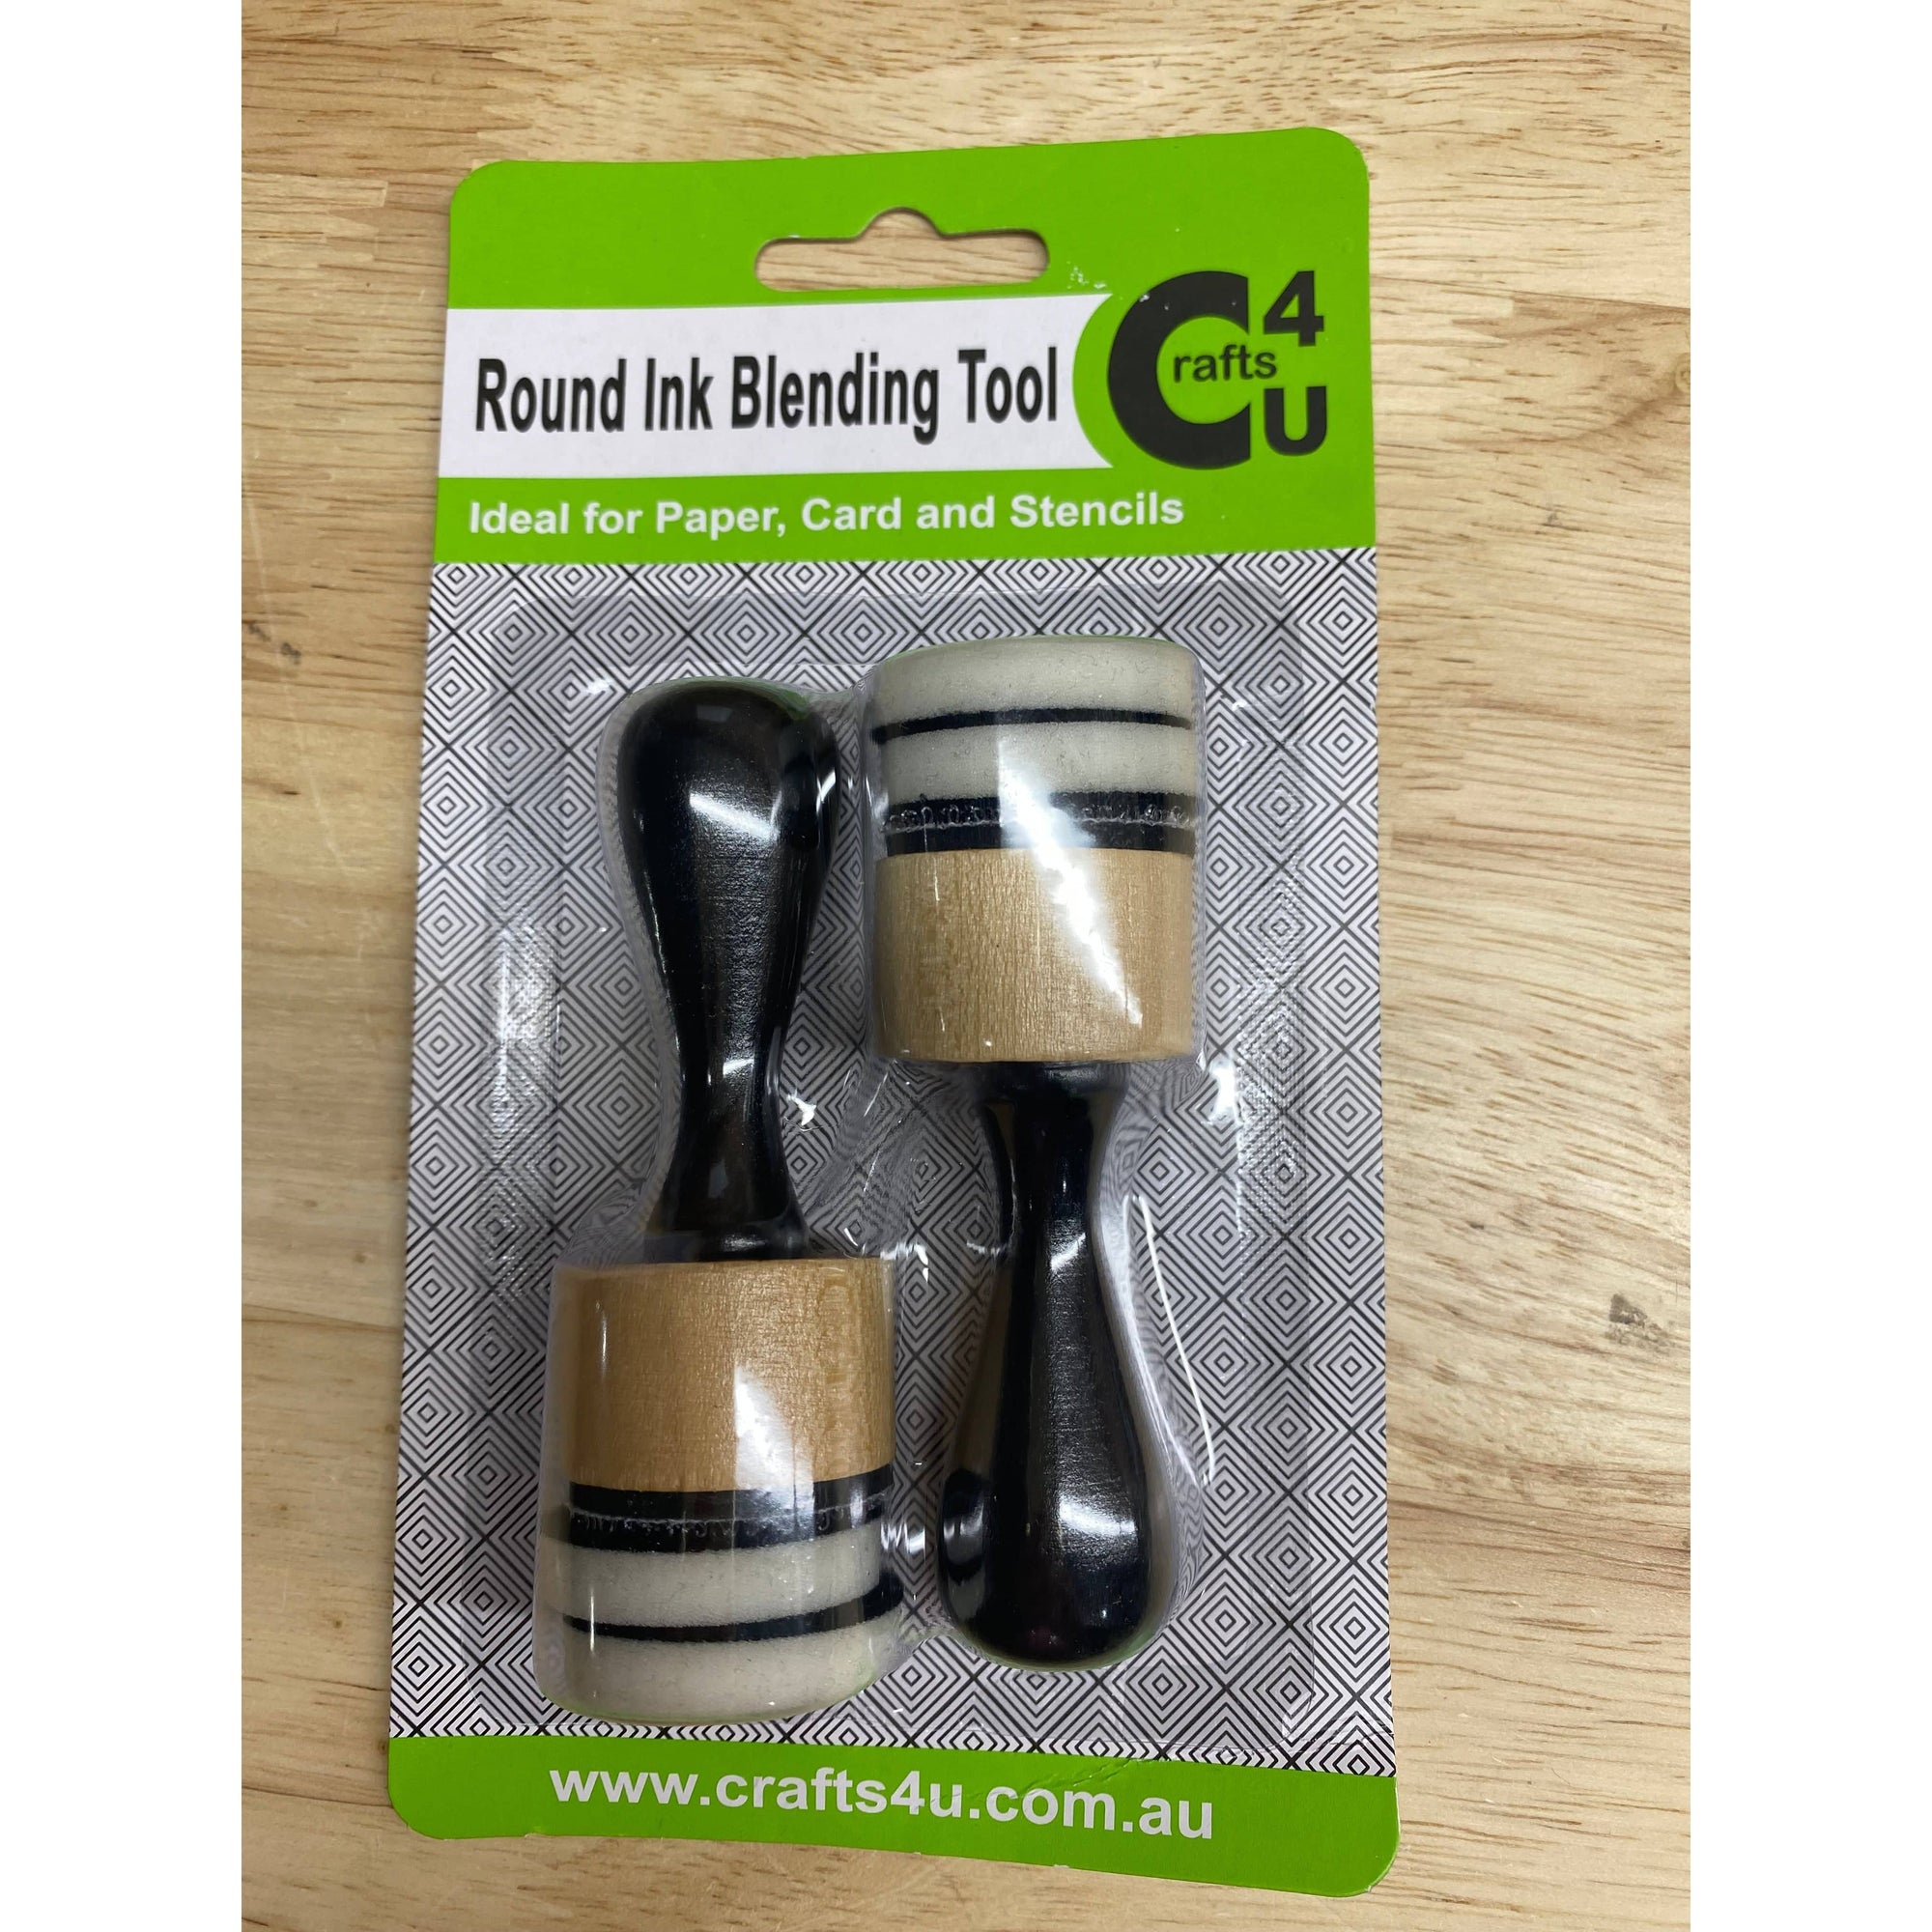 Round Ink Blending Tools with 4 Foams - Round